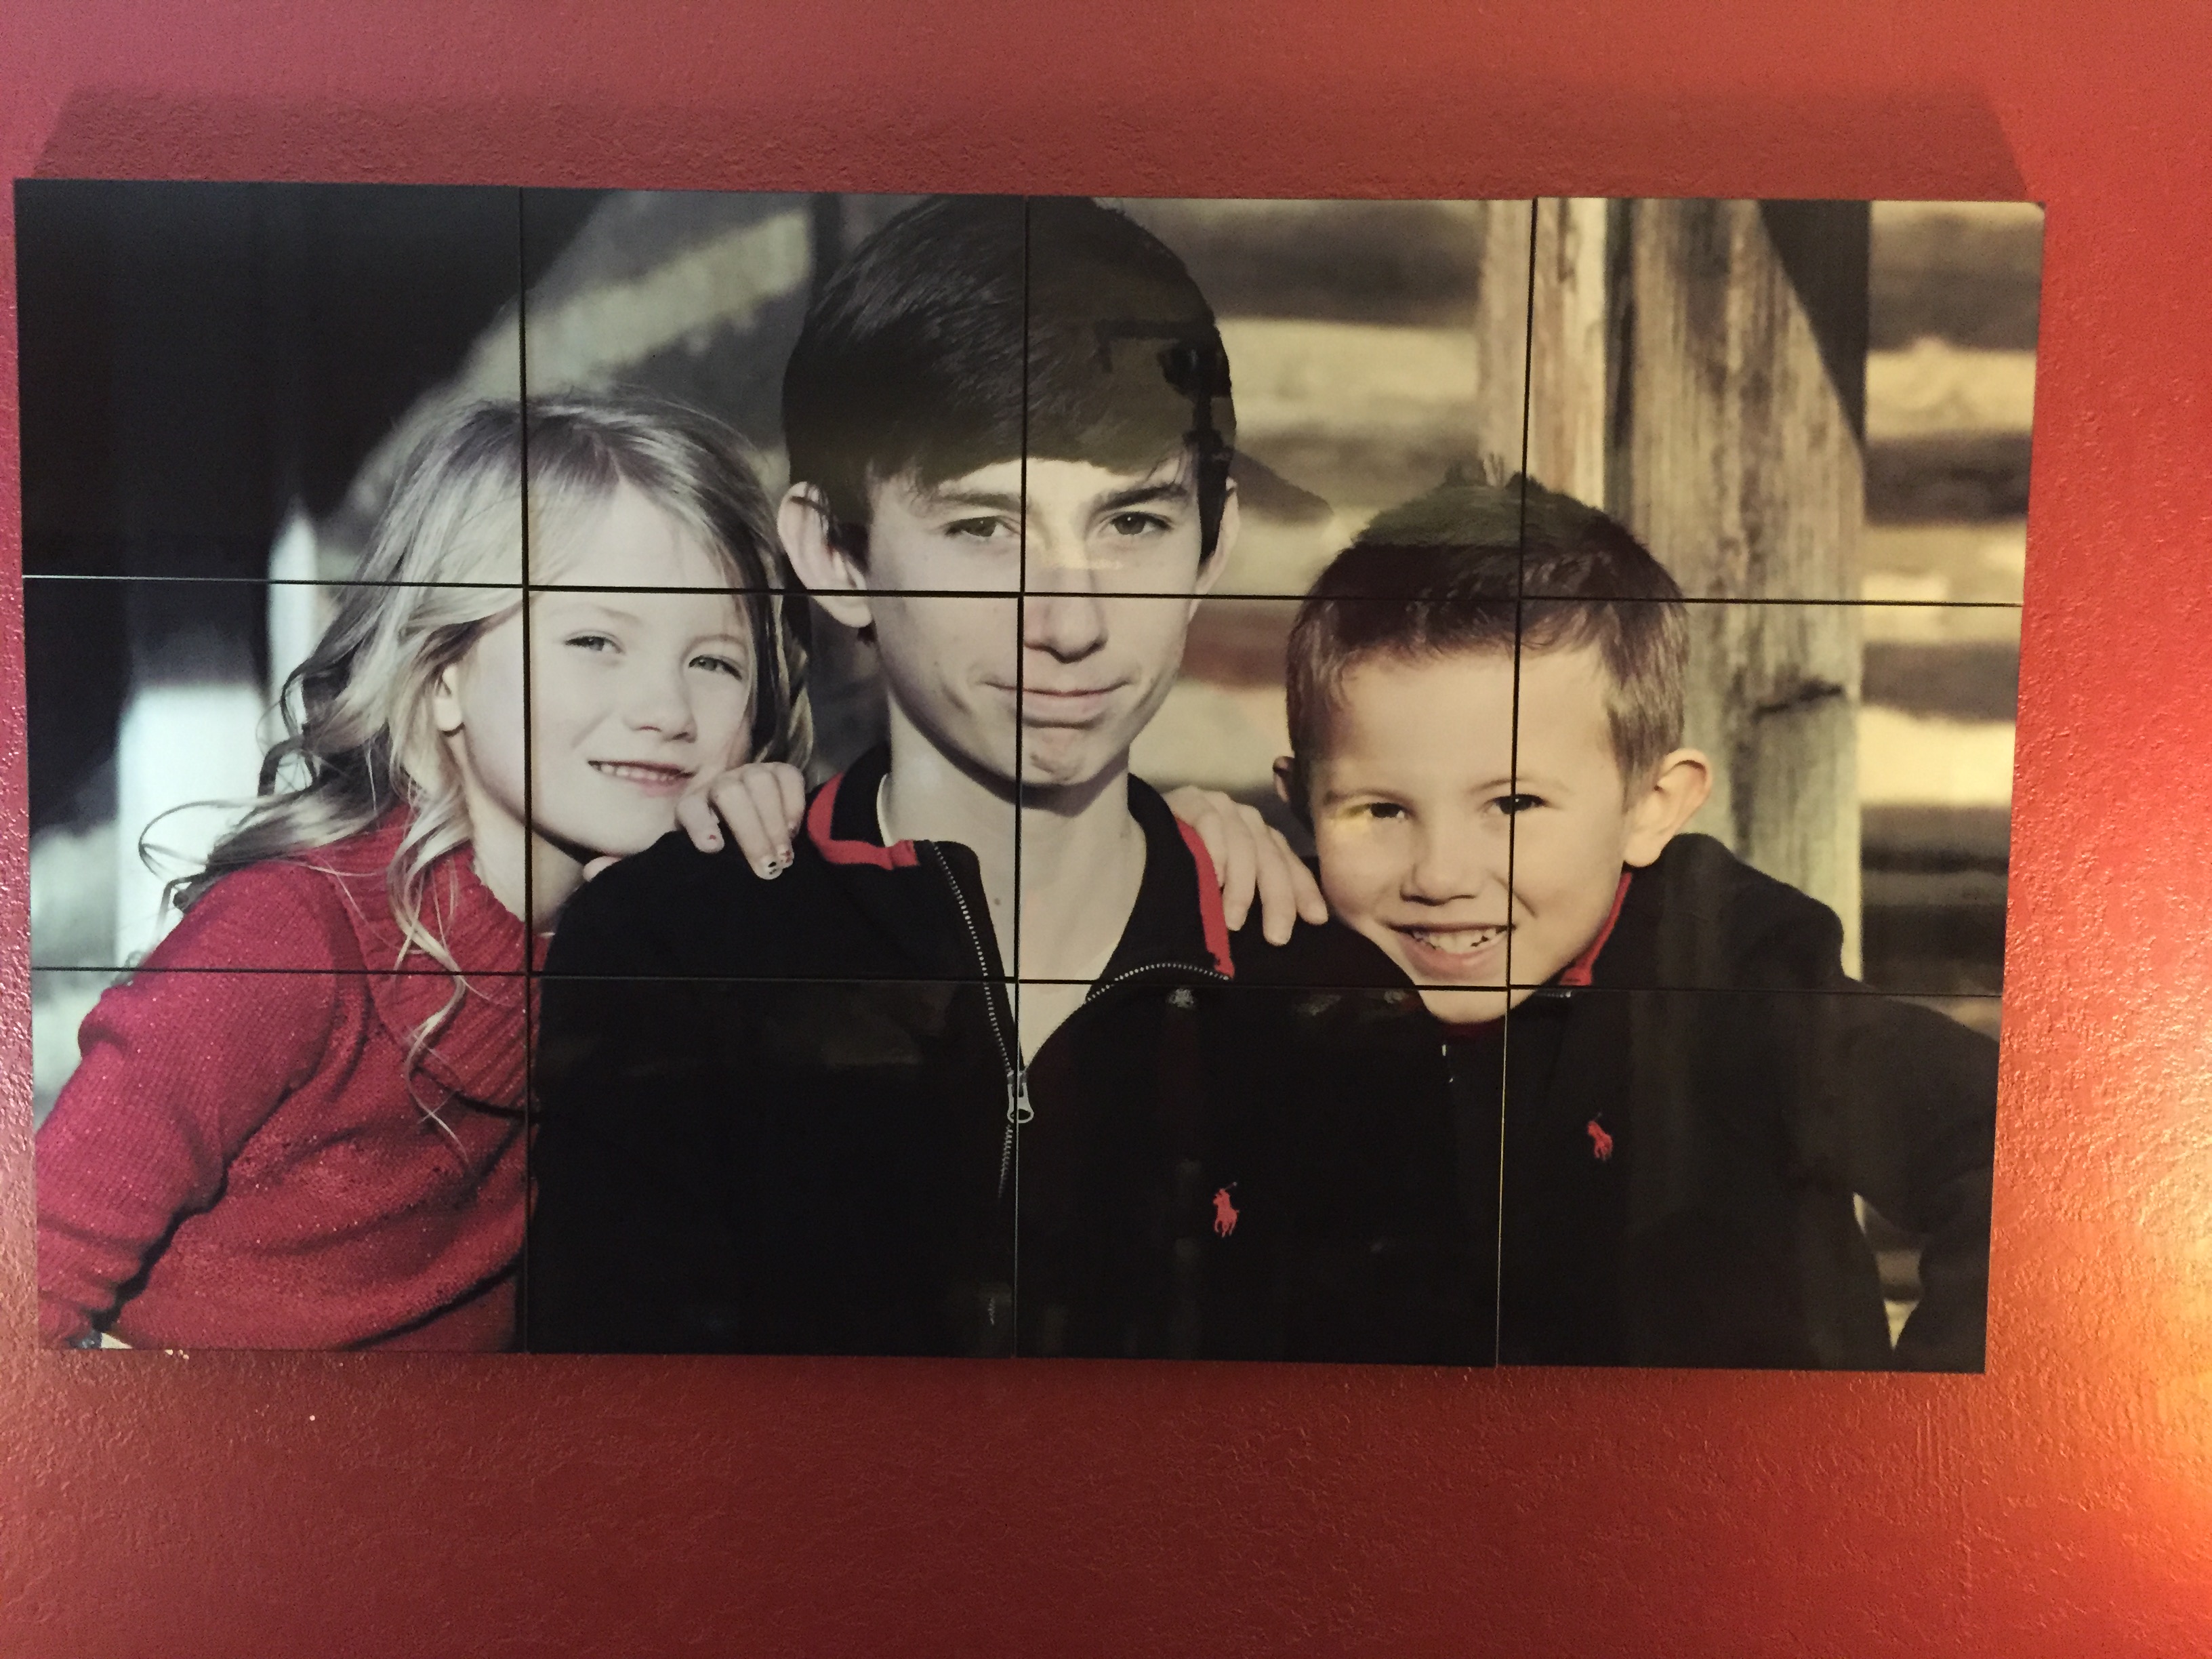 Larger than life photo made with sublimation printing